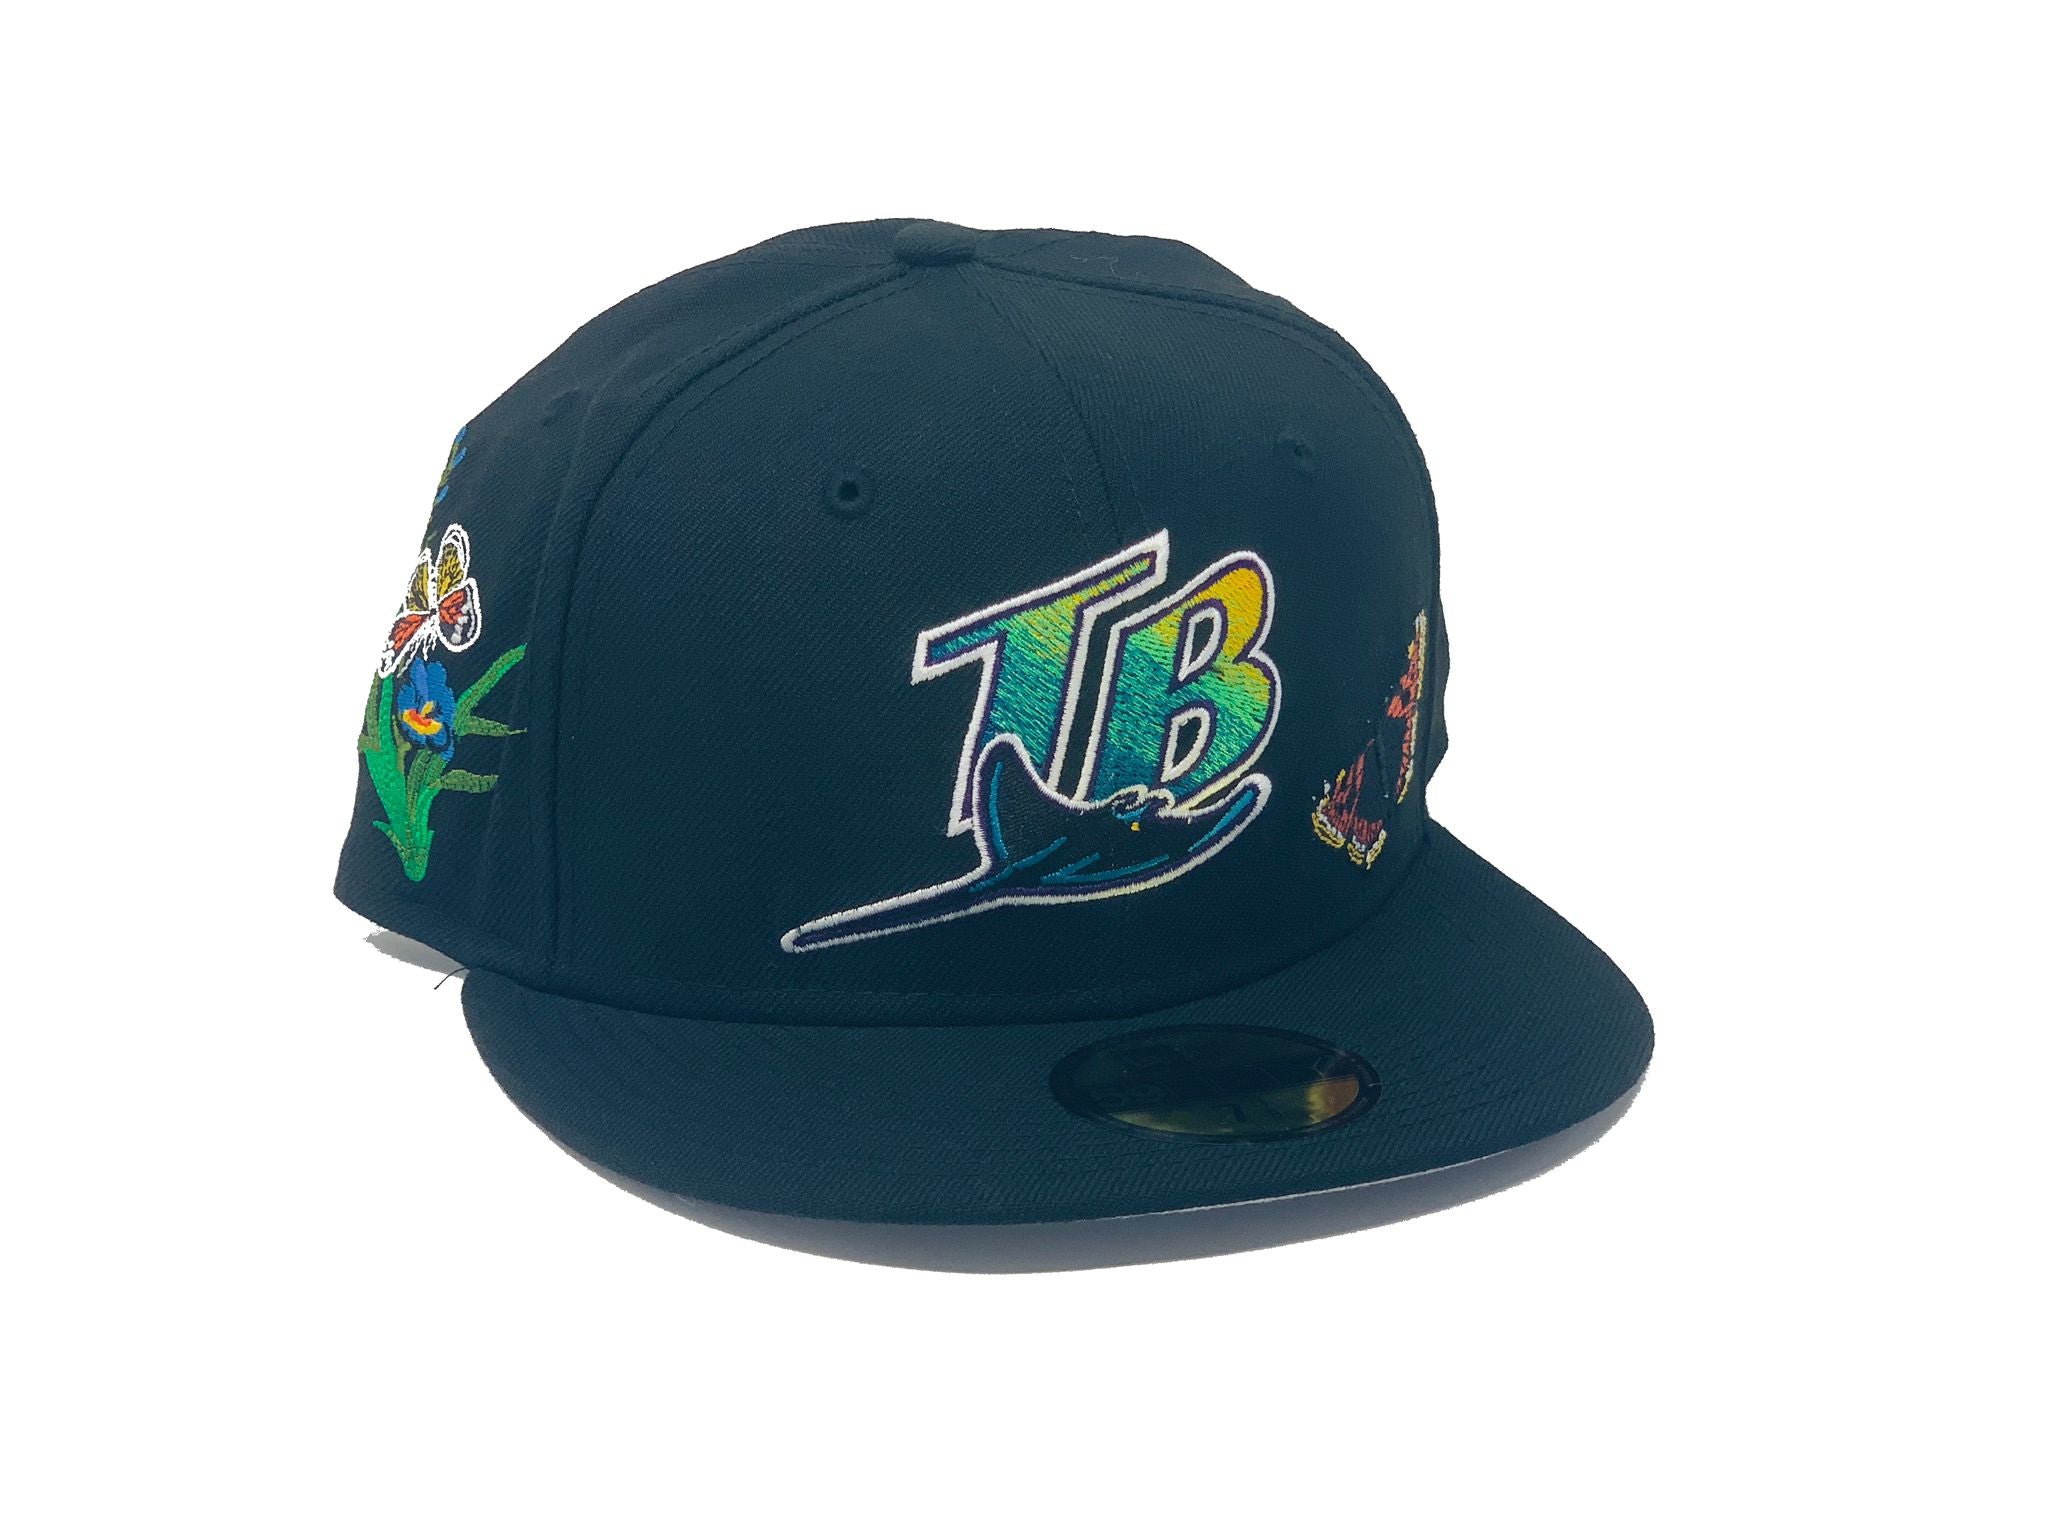 Tampa Bay Devil Rays STATEVIEW Black Fitted Hat by New Era